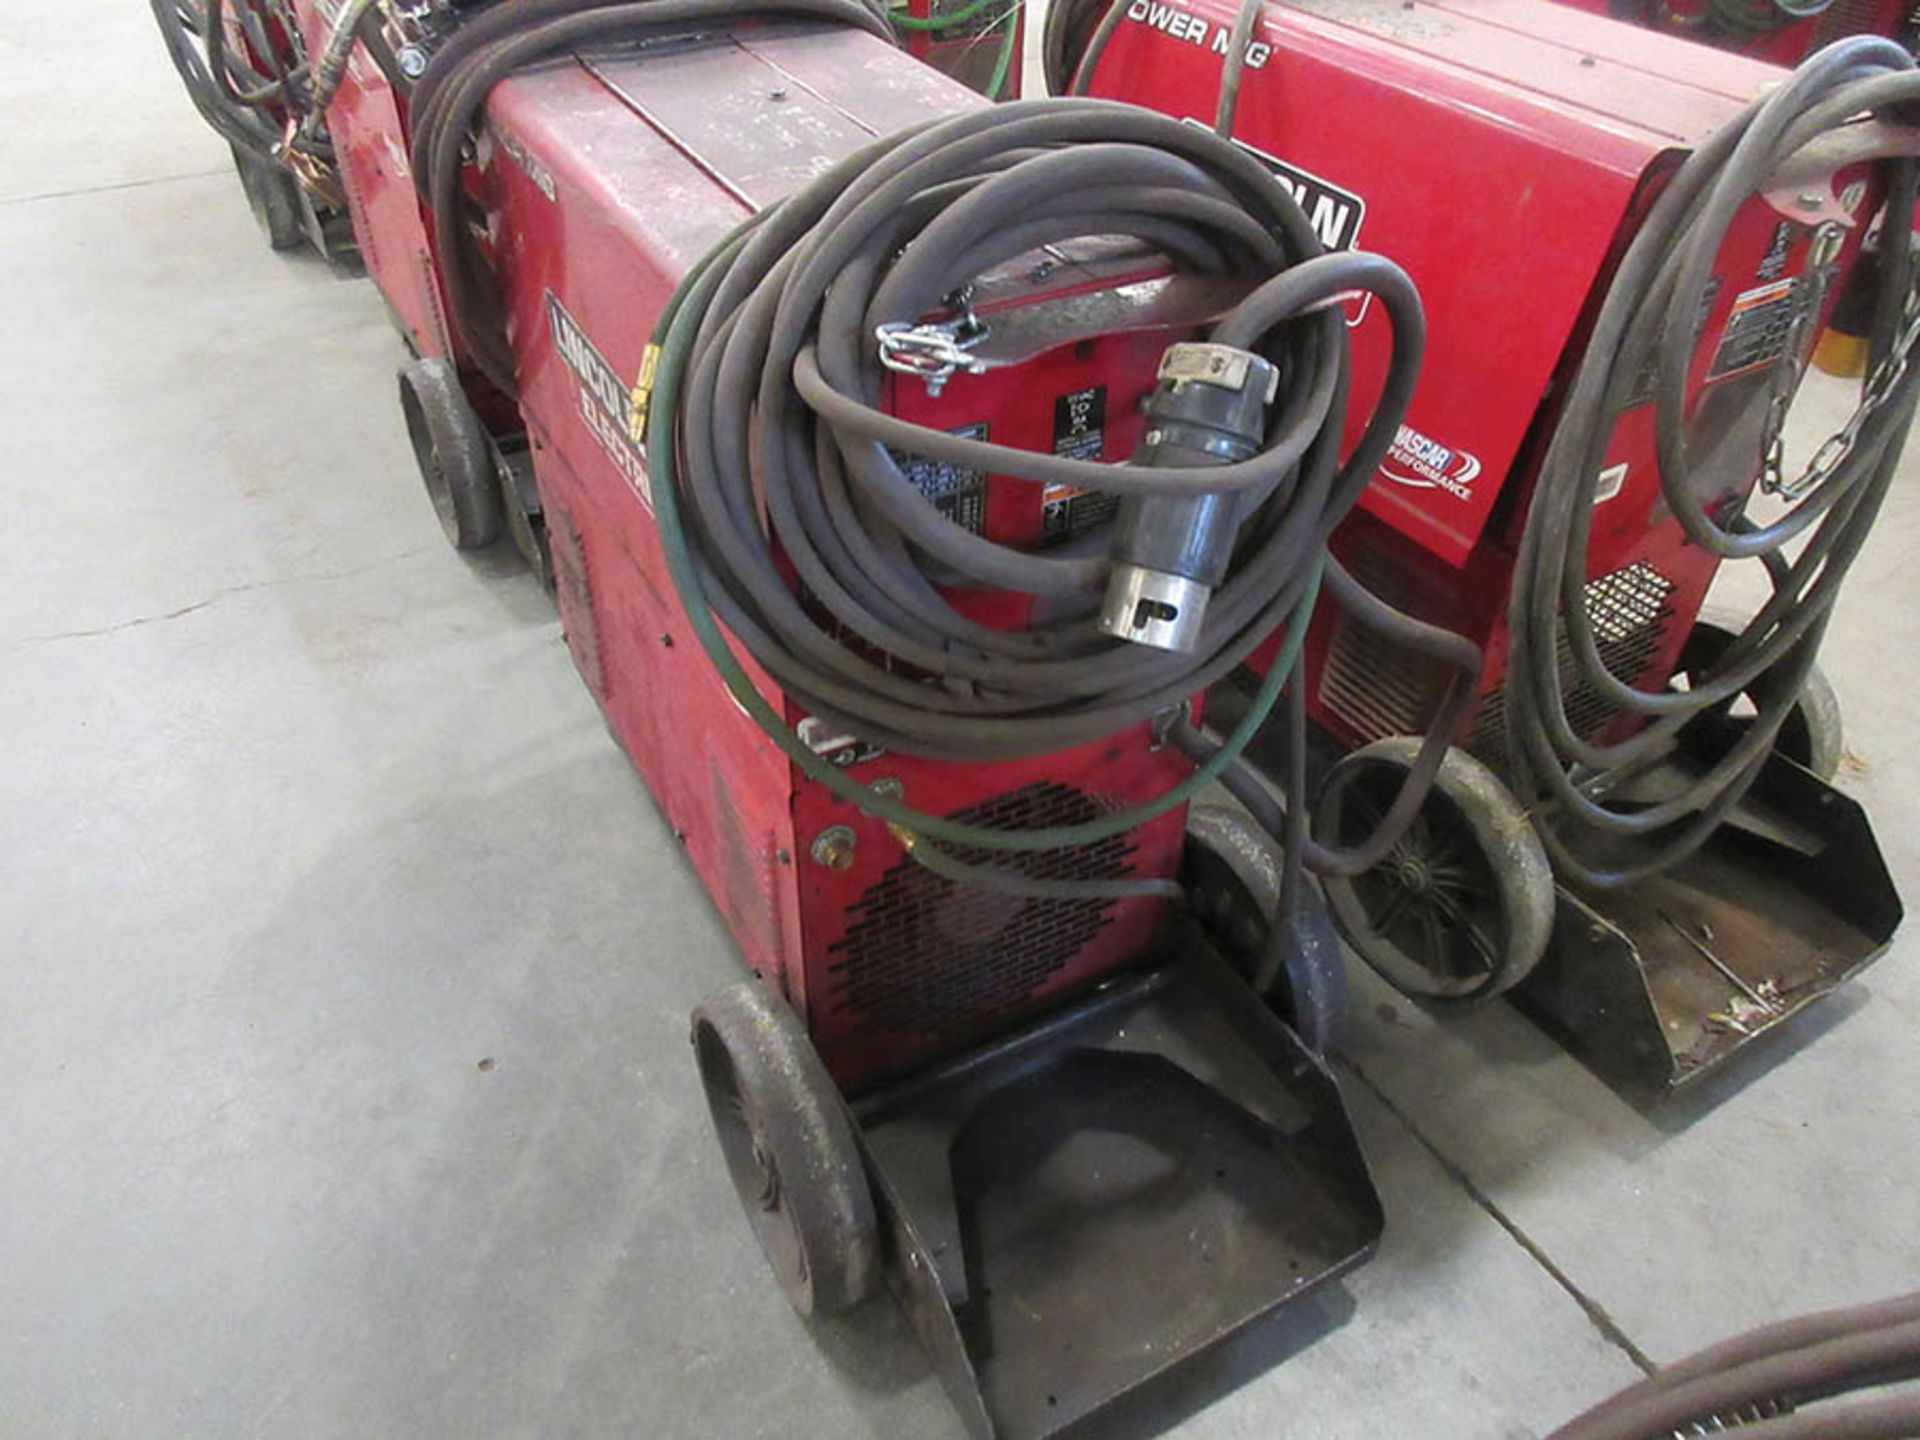 LINCOLN ELECTRIC 350MP POWER MIG WELDER WITH TWECO WELDSKILL MIG GUN, #46 - Image 2 of 3